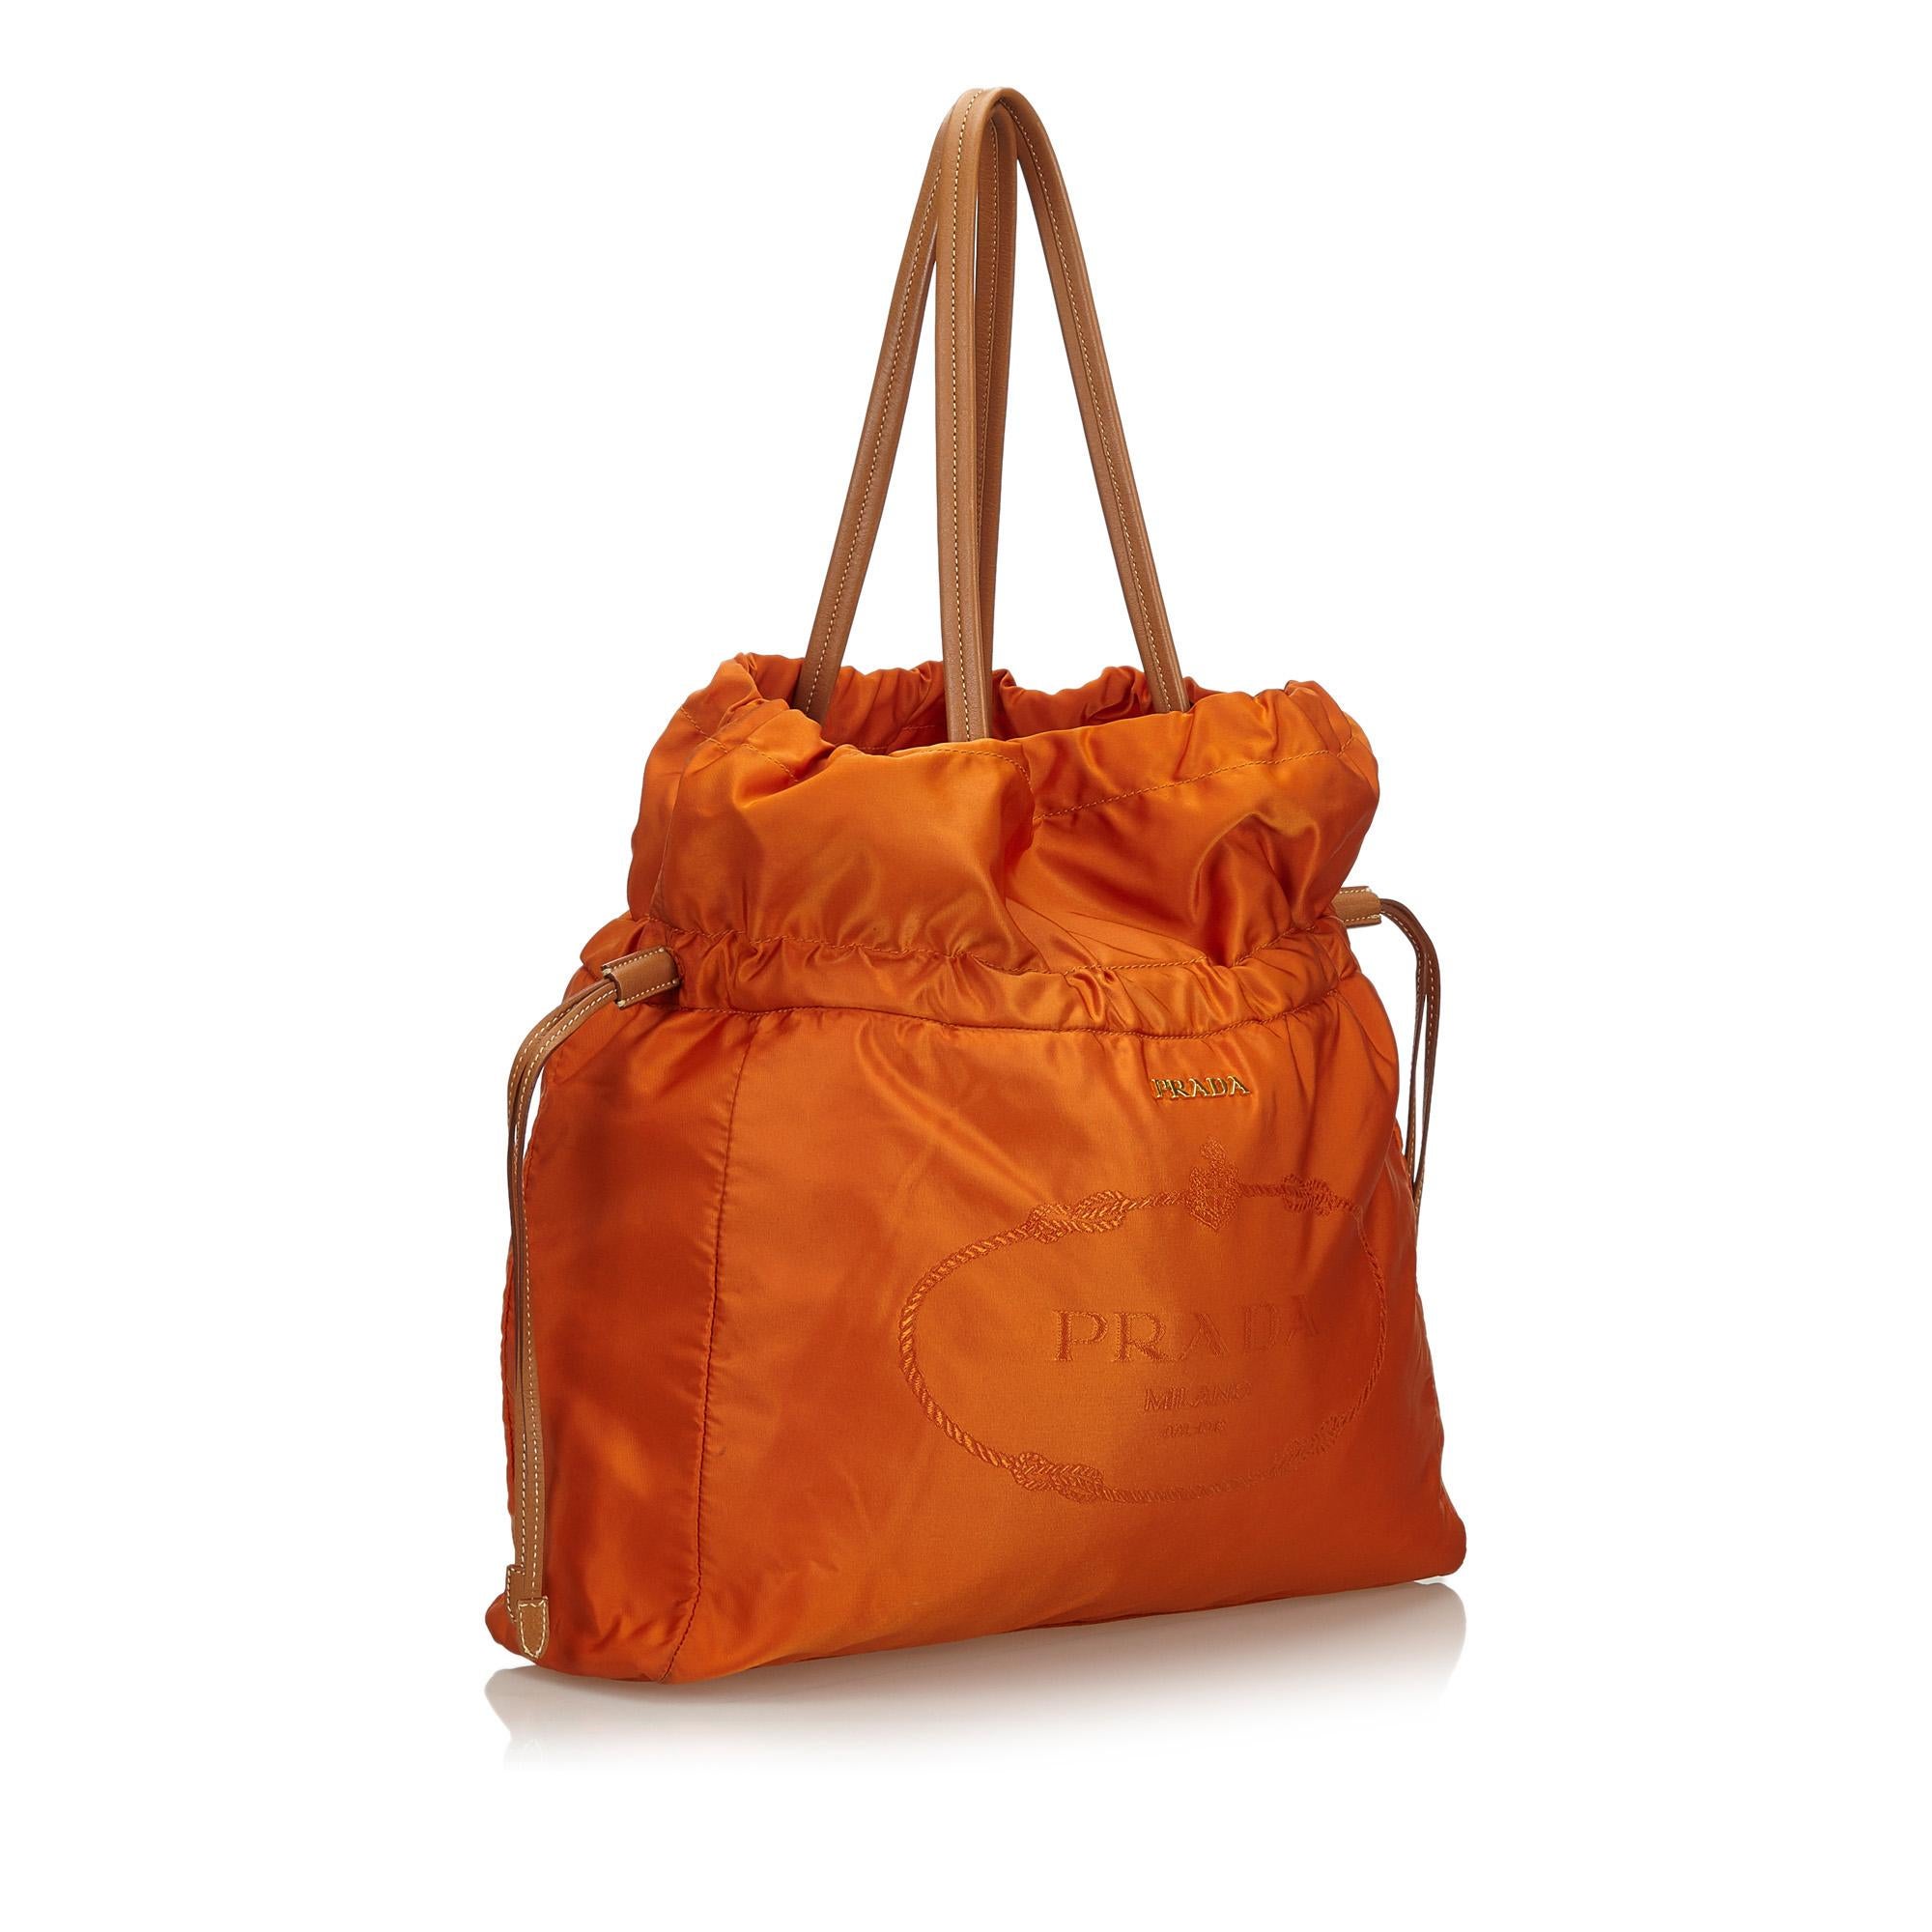 This tote bag features a nylon body, flat leather handles, a drawstring closure, and an interior zip pocket. It carries as B+ condition rating.

Inclusions: 
This item does not come with inclusions.

Dimensions:
Length: 31.00 cm
Width: 36.00